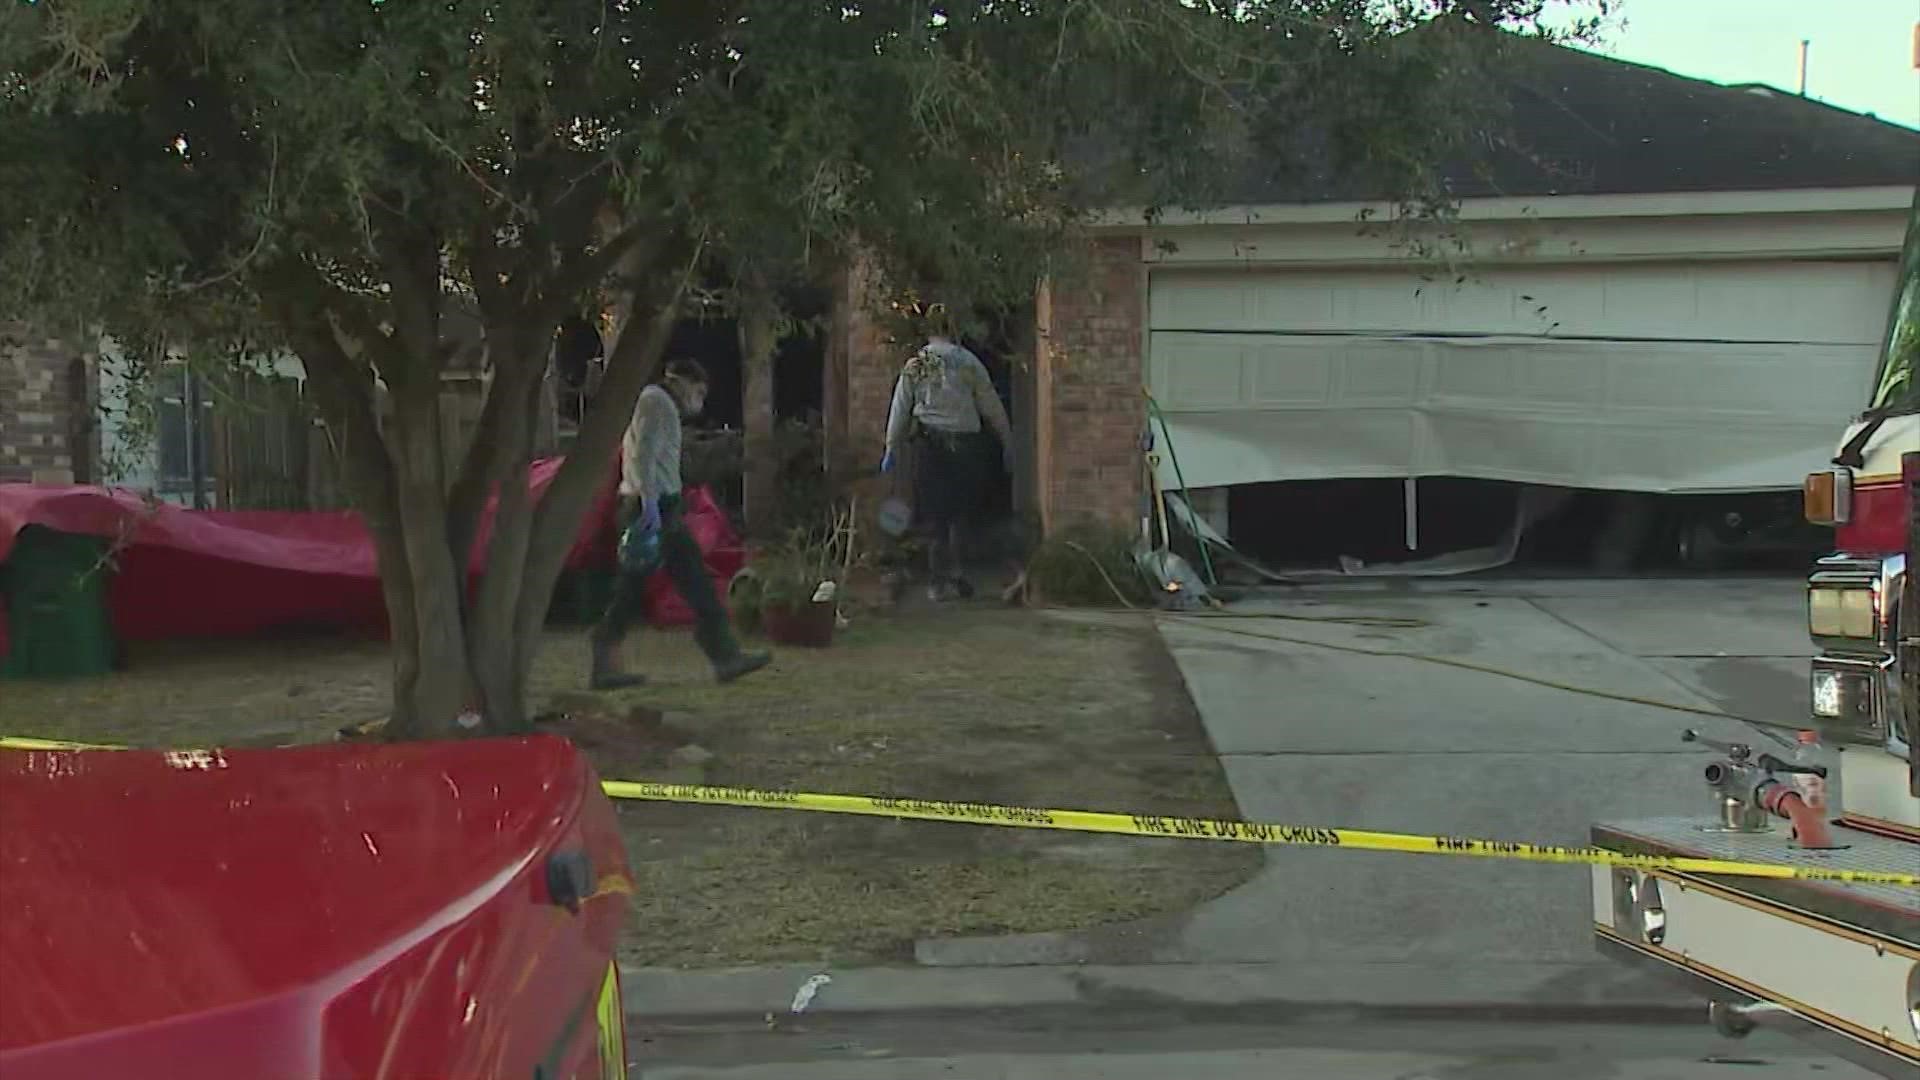 Harris County sheriff's deputies are saying a woman found dead after a house fire had wounds inconsistent with a fire. Her grandchildren and son remain hospitalized